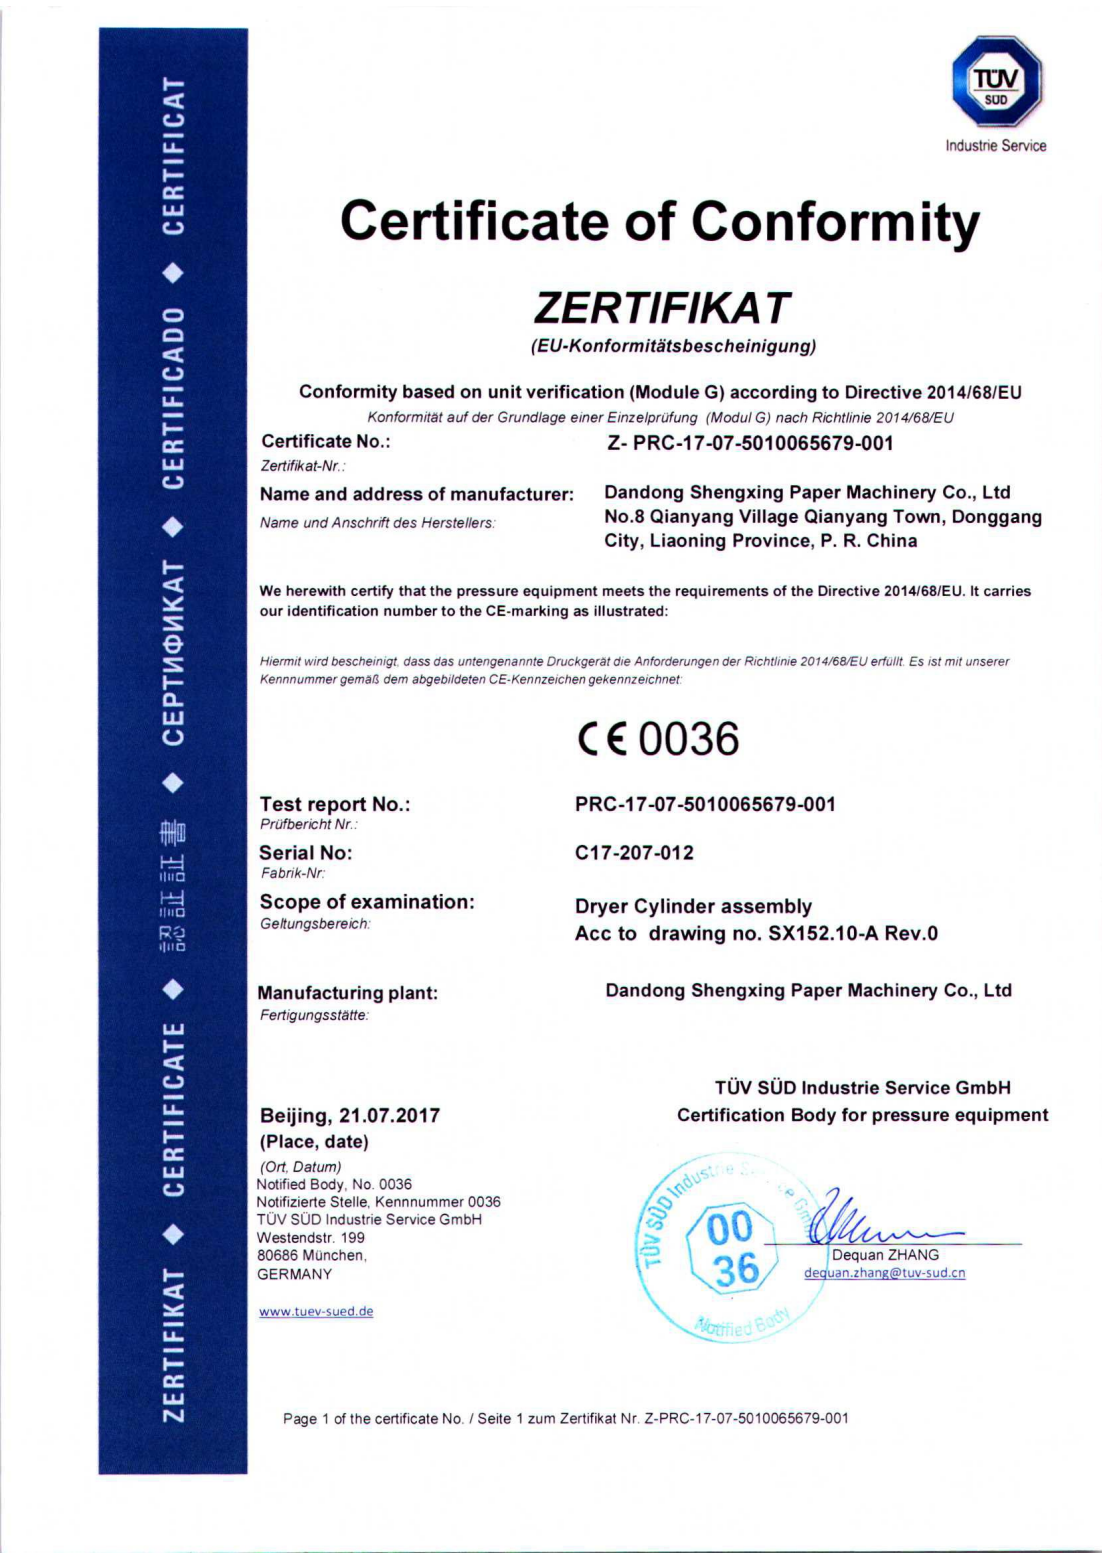 PED certificate for the dryer cylinder export to Europ